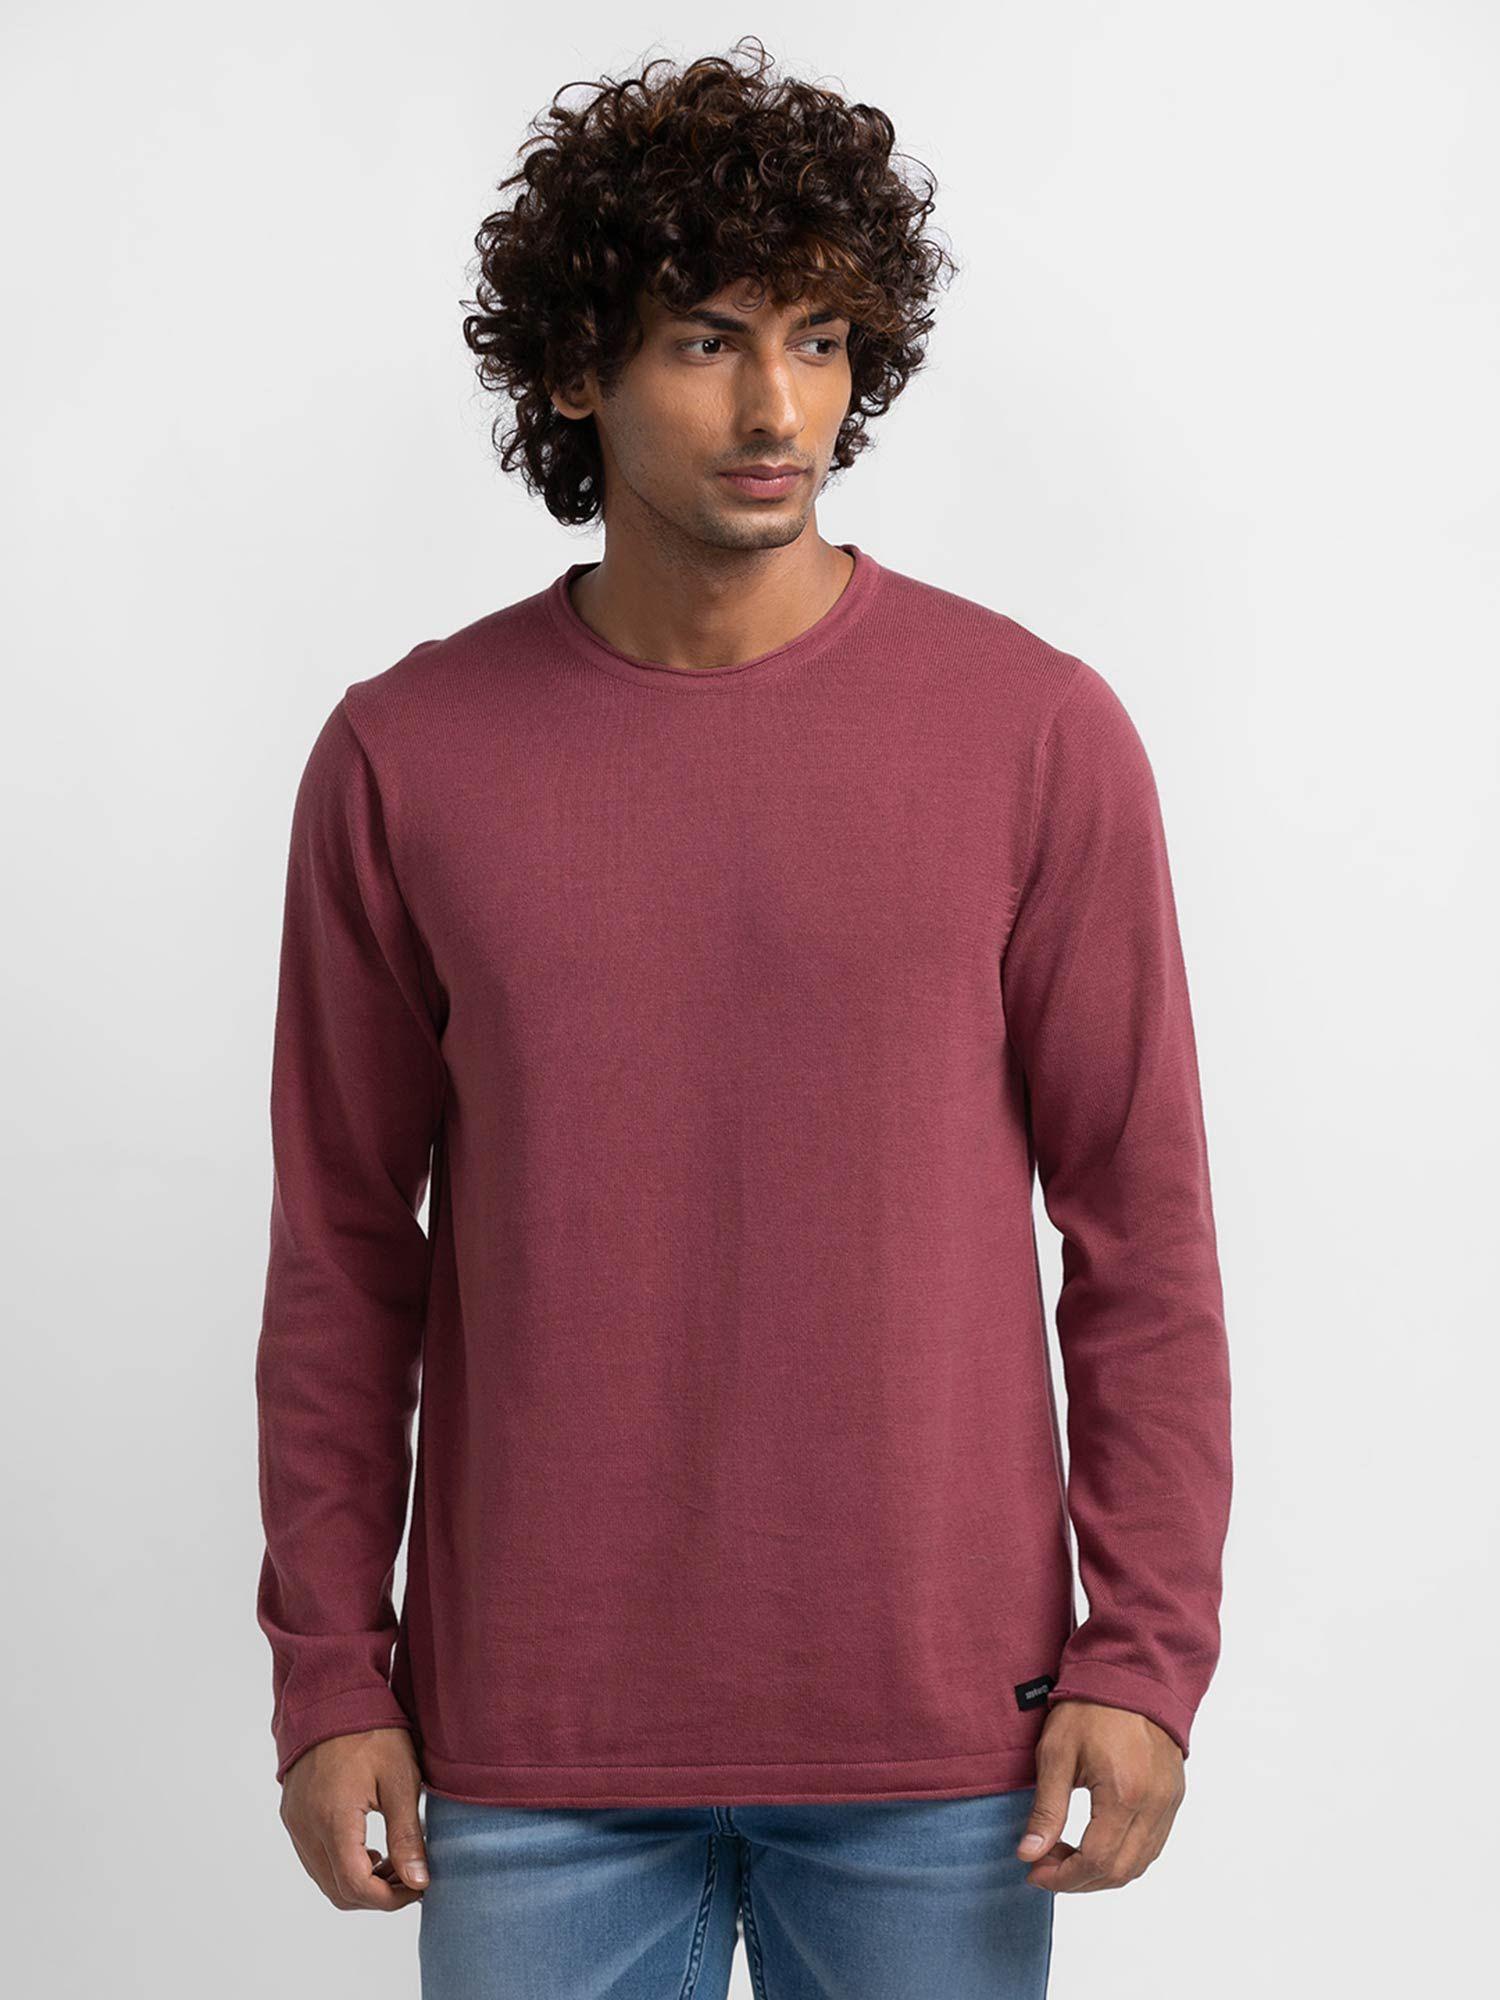 mauve-red-cotton-full-sleeve-casual-sweater-for-men